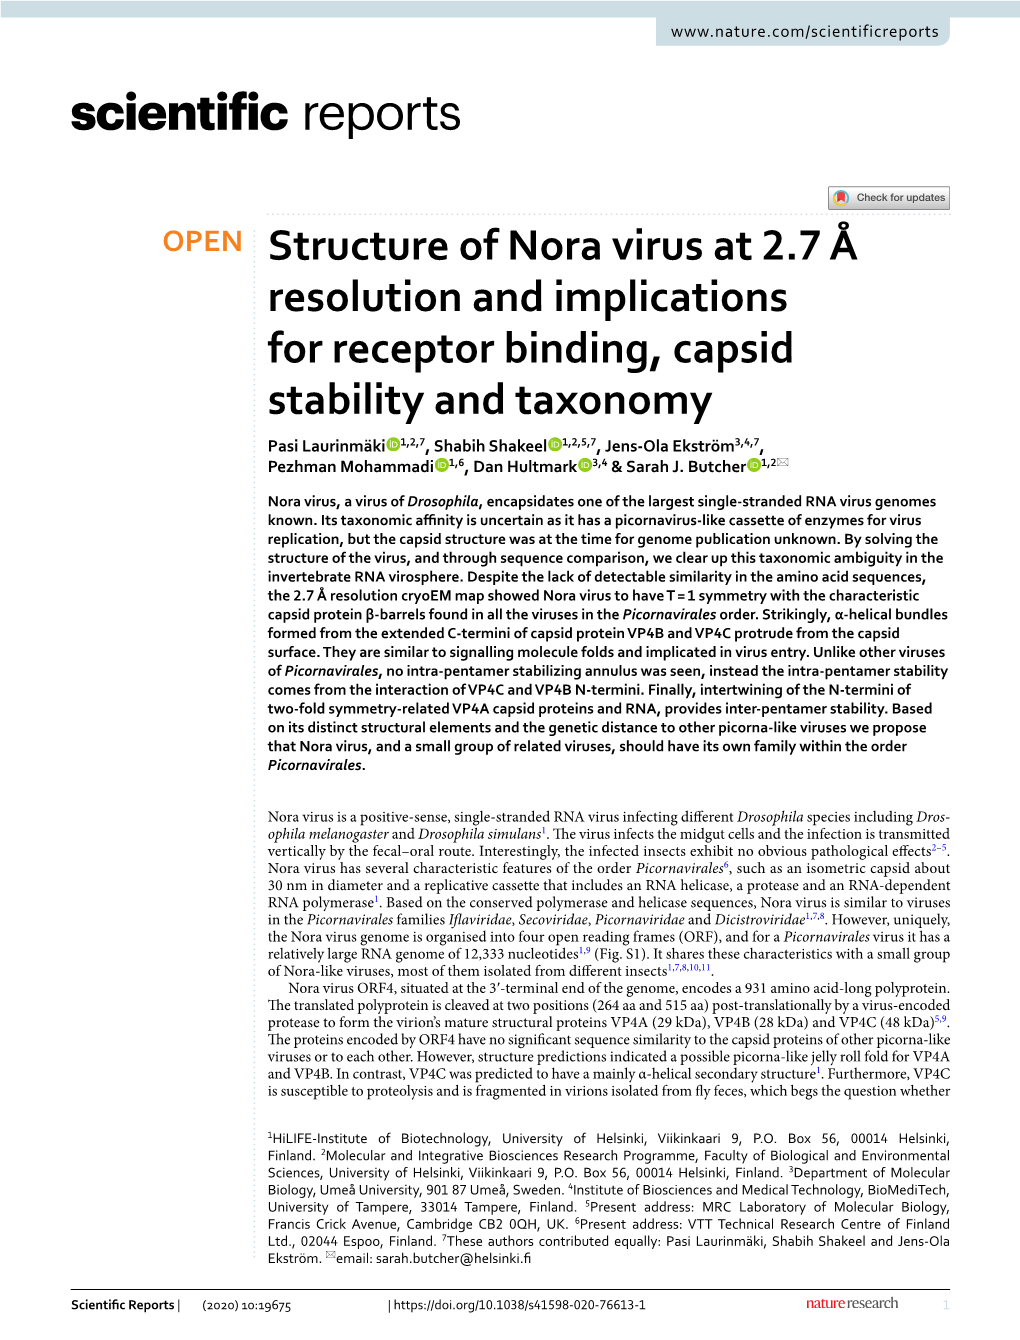 Structure of Nora Virus at 2.7 Å Resolution and Implications for Receptor Binding, Capsid Stability and Taxonomy